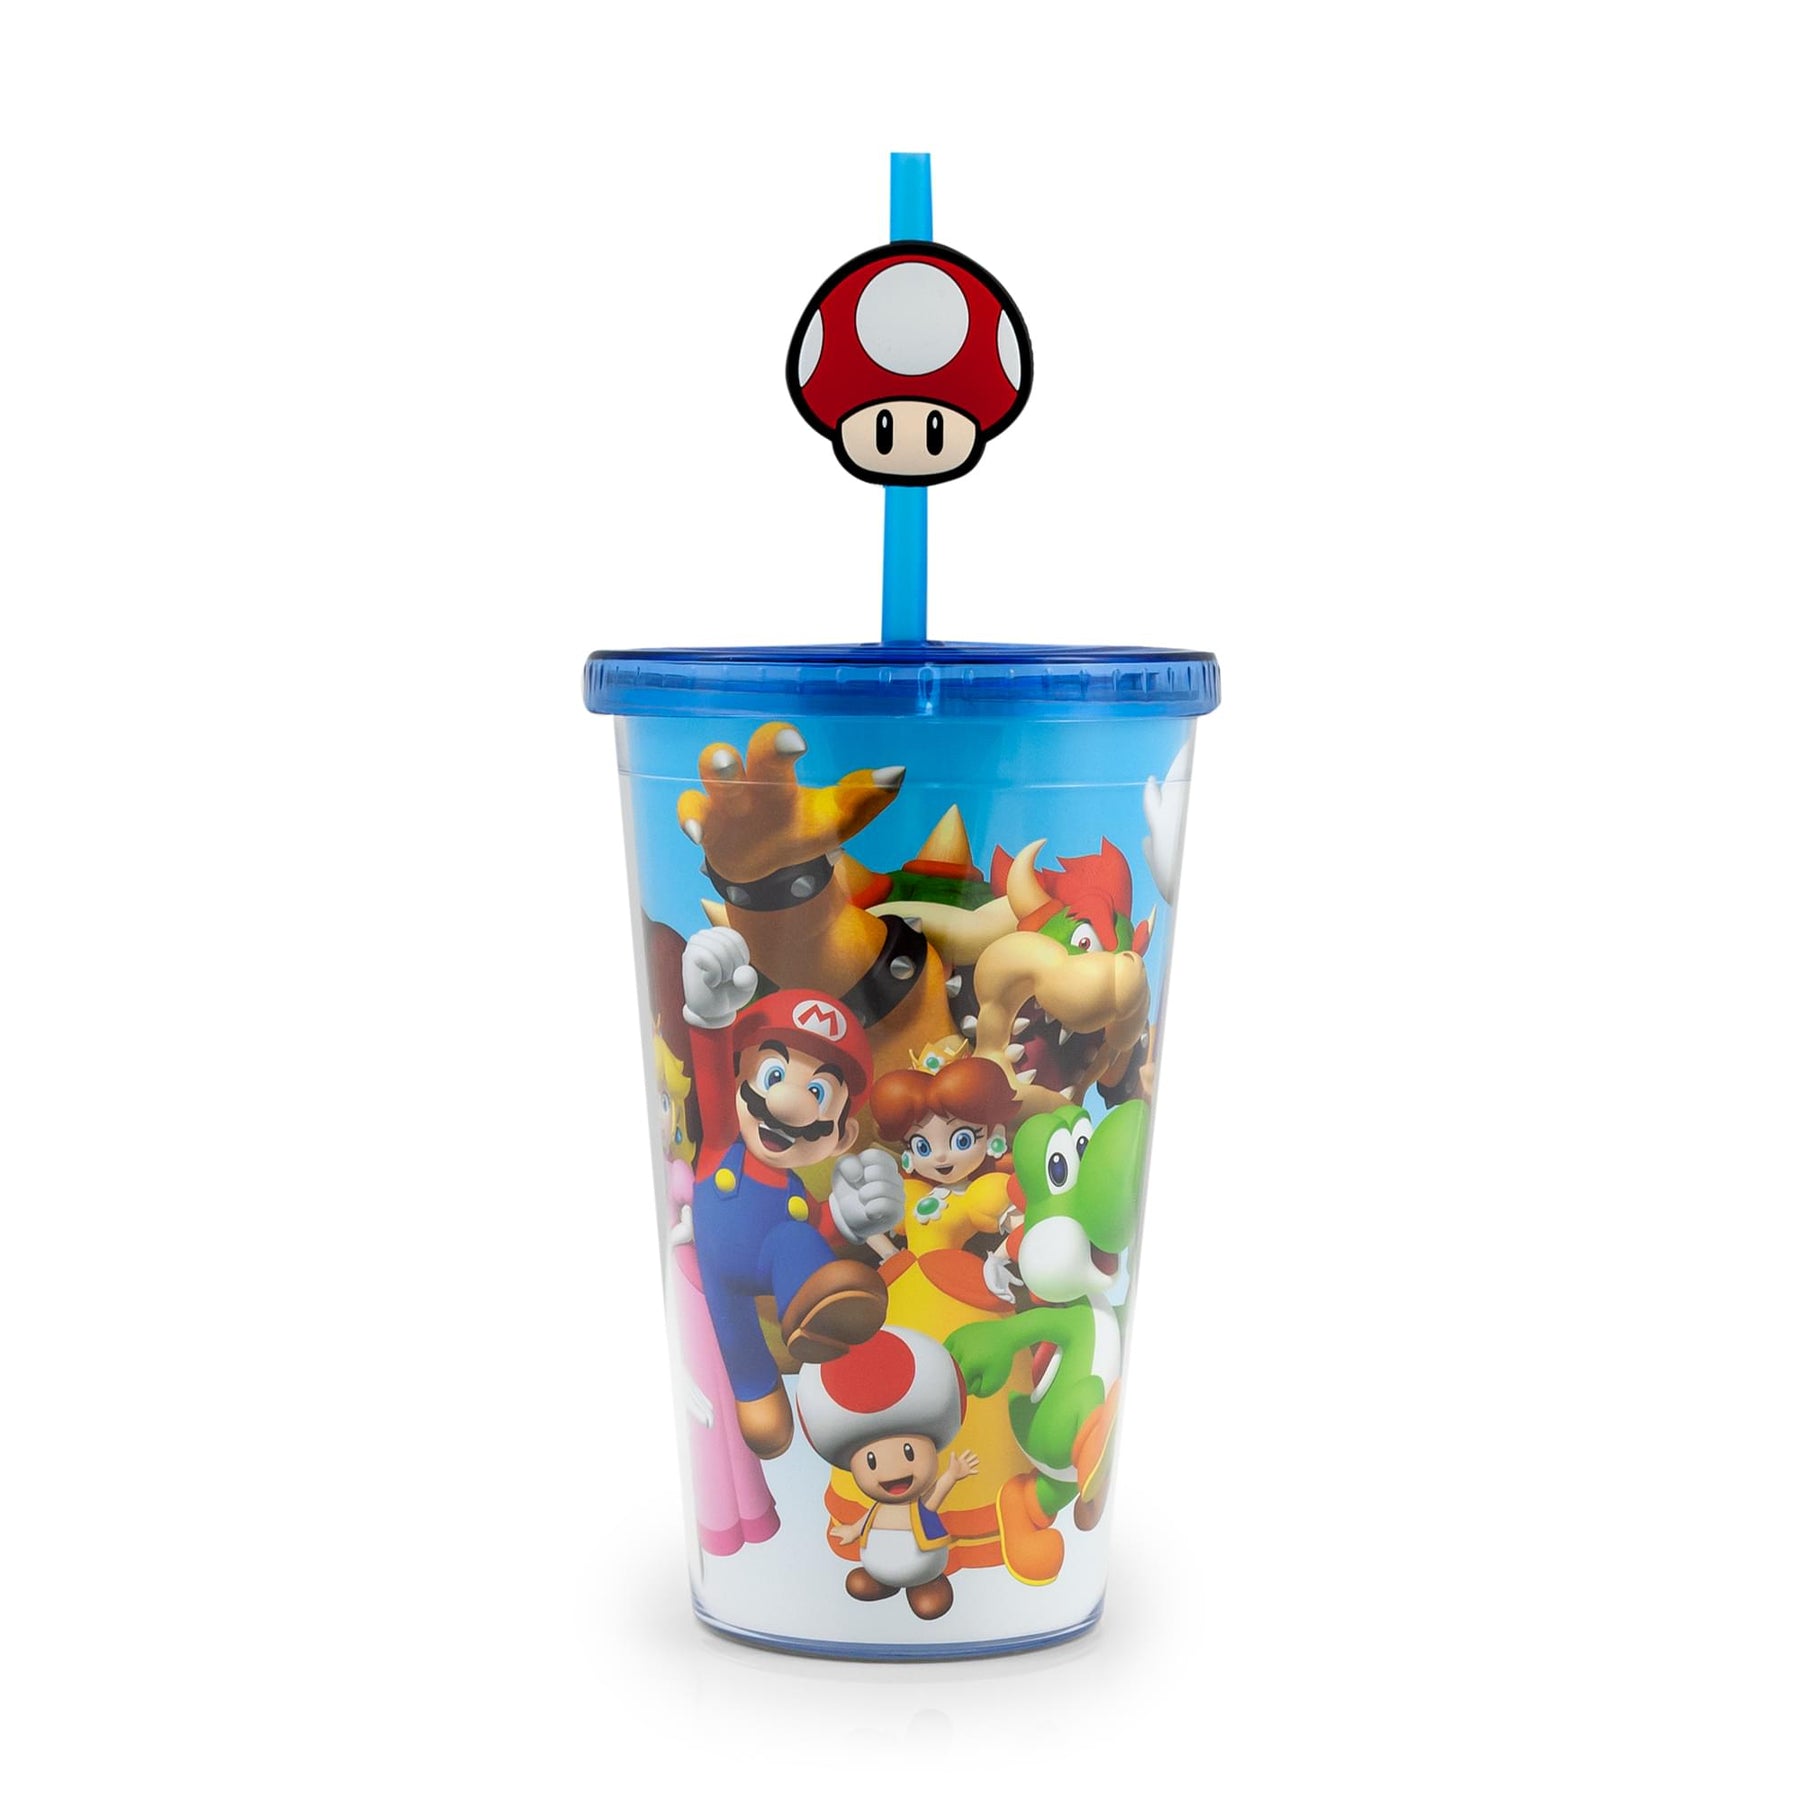 Cartoon Cup Holder For Bag, Plastic Lightweight Accessories